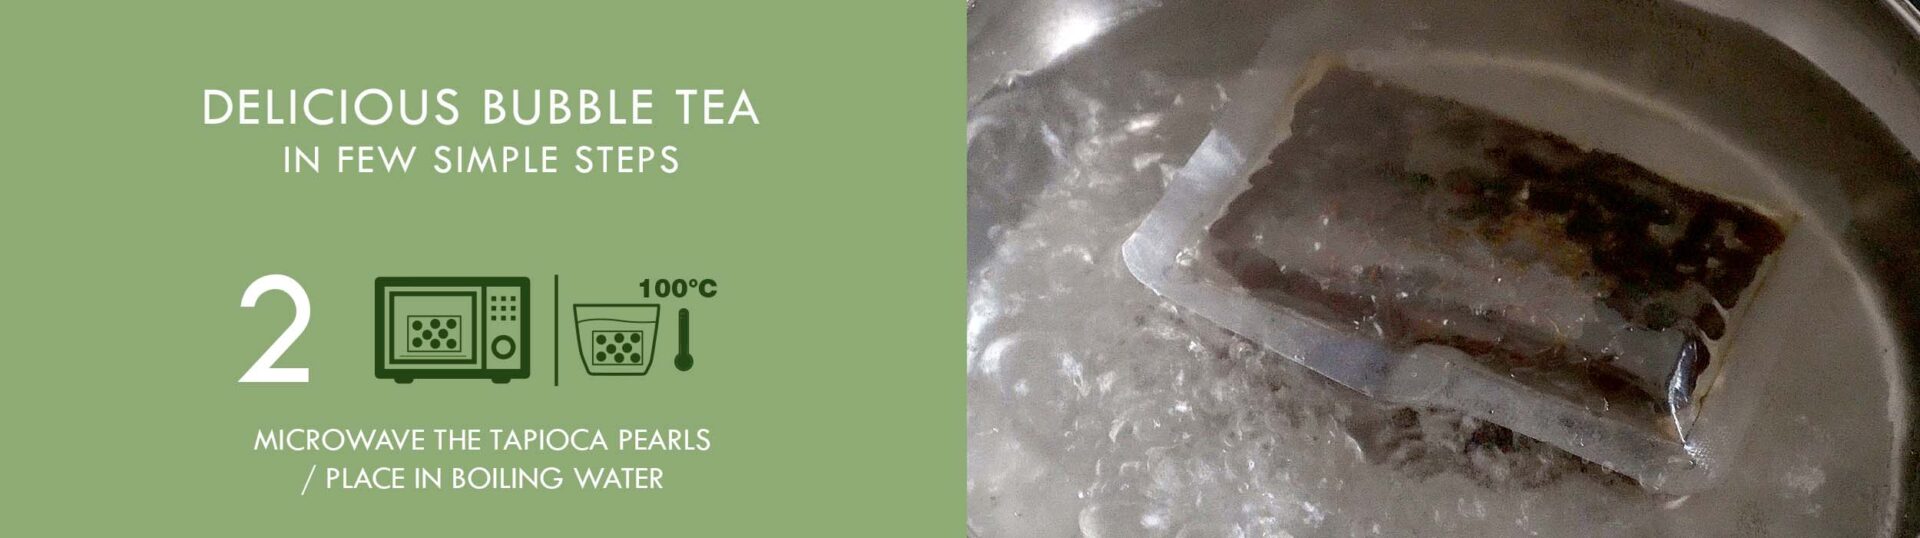 bubble tea instruction slides step 2 place tapioca pearls in boiling water